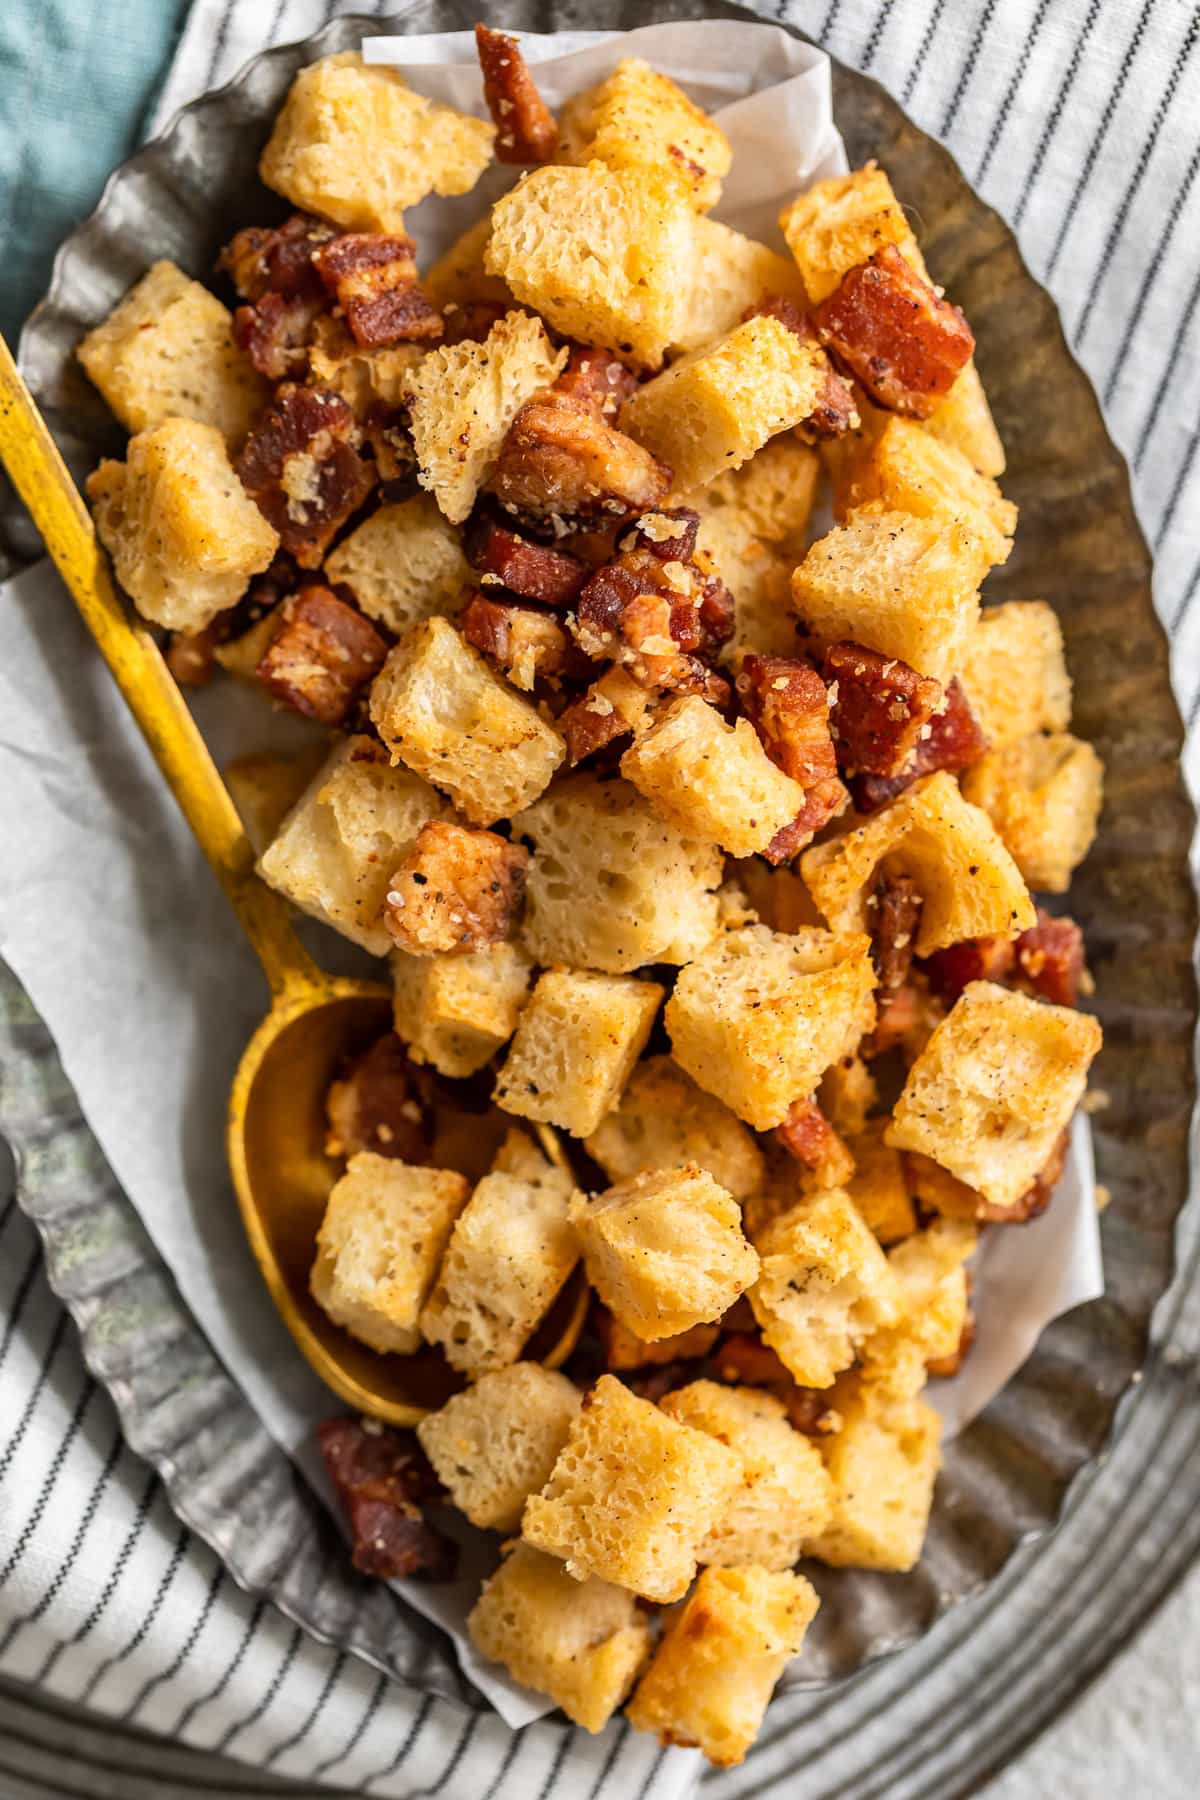 croutons and bacon bits